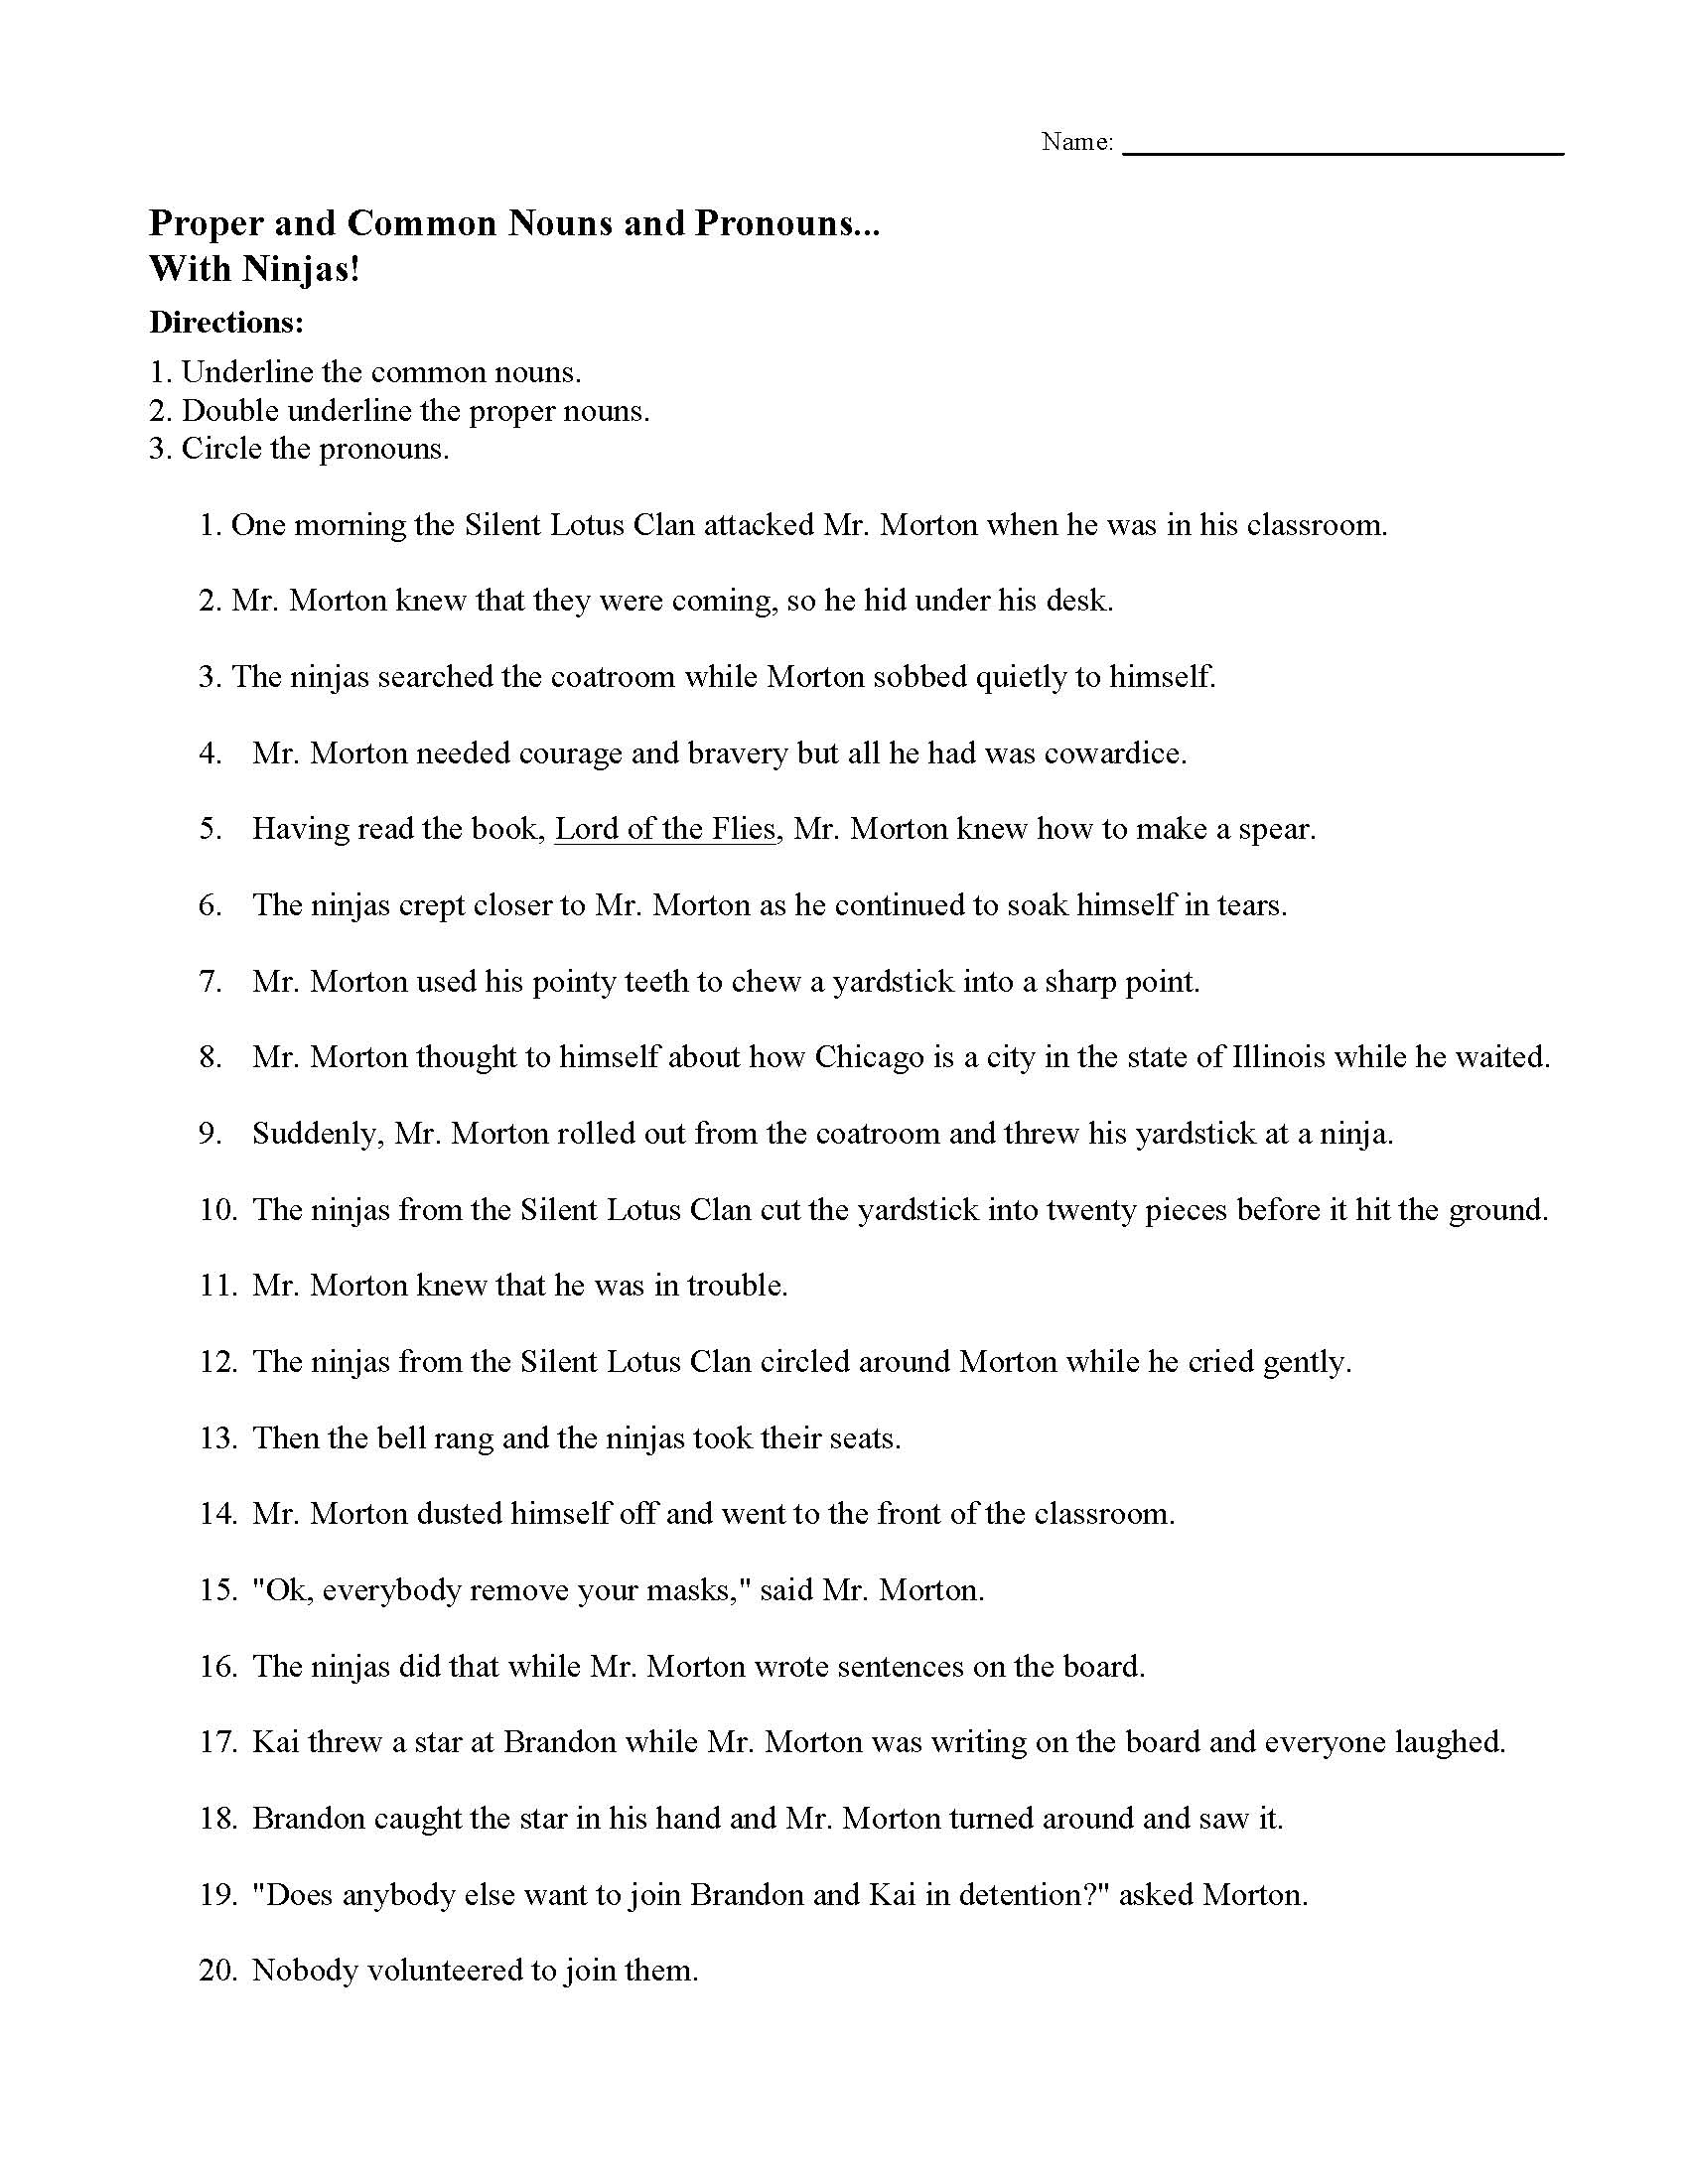 This is a preview image of Proper Nouns, Common Nouns, and Pronouns Worksheet | "With Ninjas". Click on it to enlarge it or view the source file.